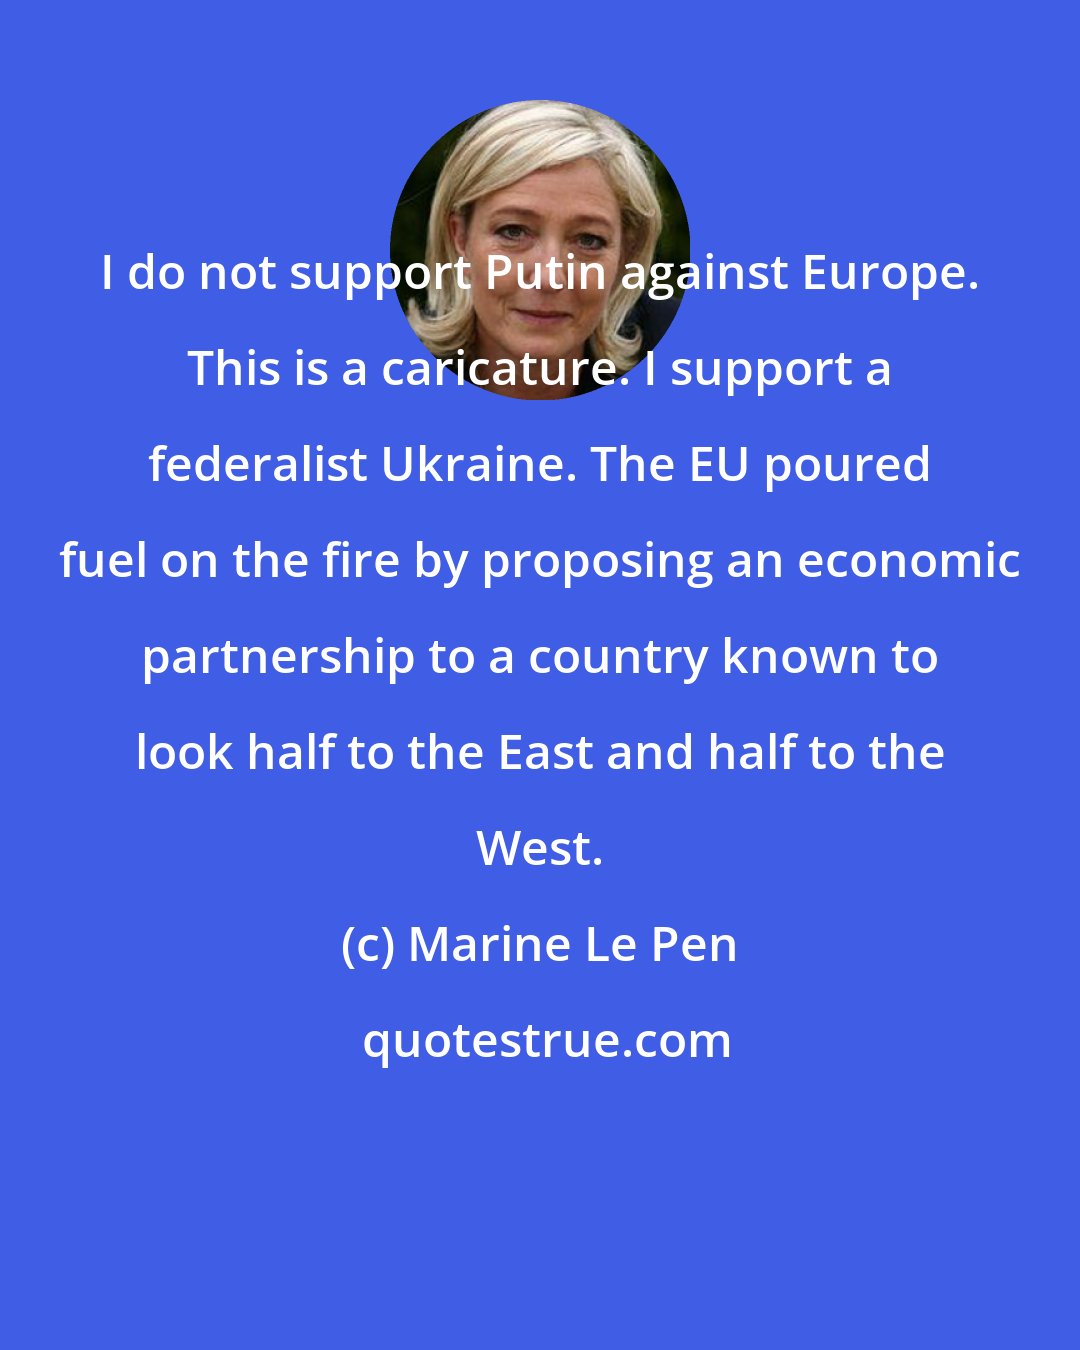 Marine Le Pen: I do not support Putin against Europe. This is a caricature. I support a federalist Ukraine. The EU poured fuel on the fire by proposing an economic partnership to a country known to look half to the East and half to the West.